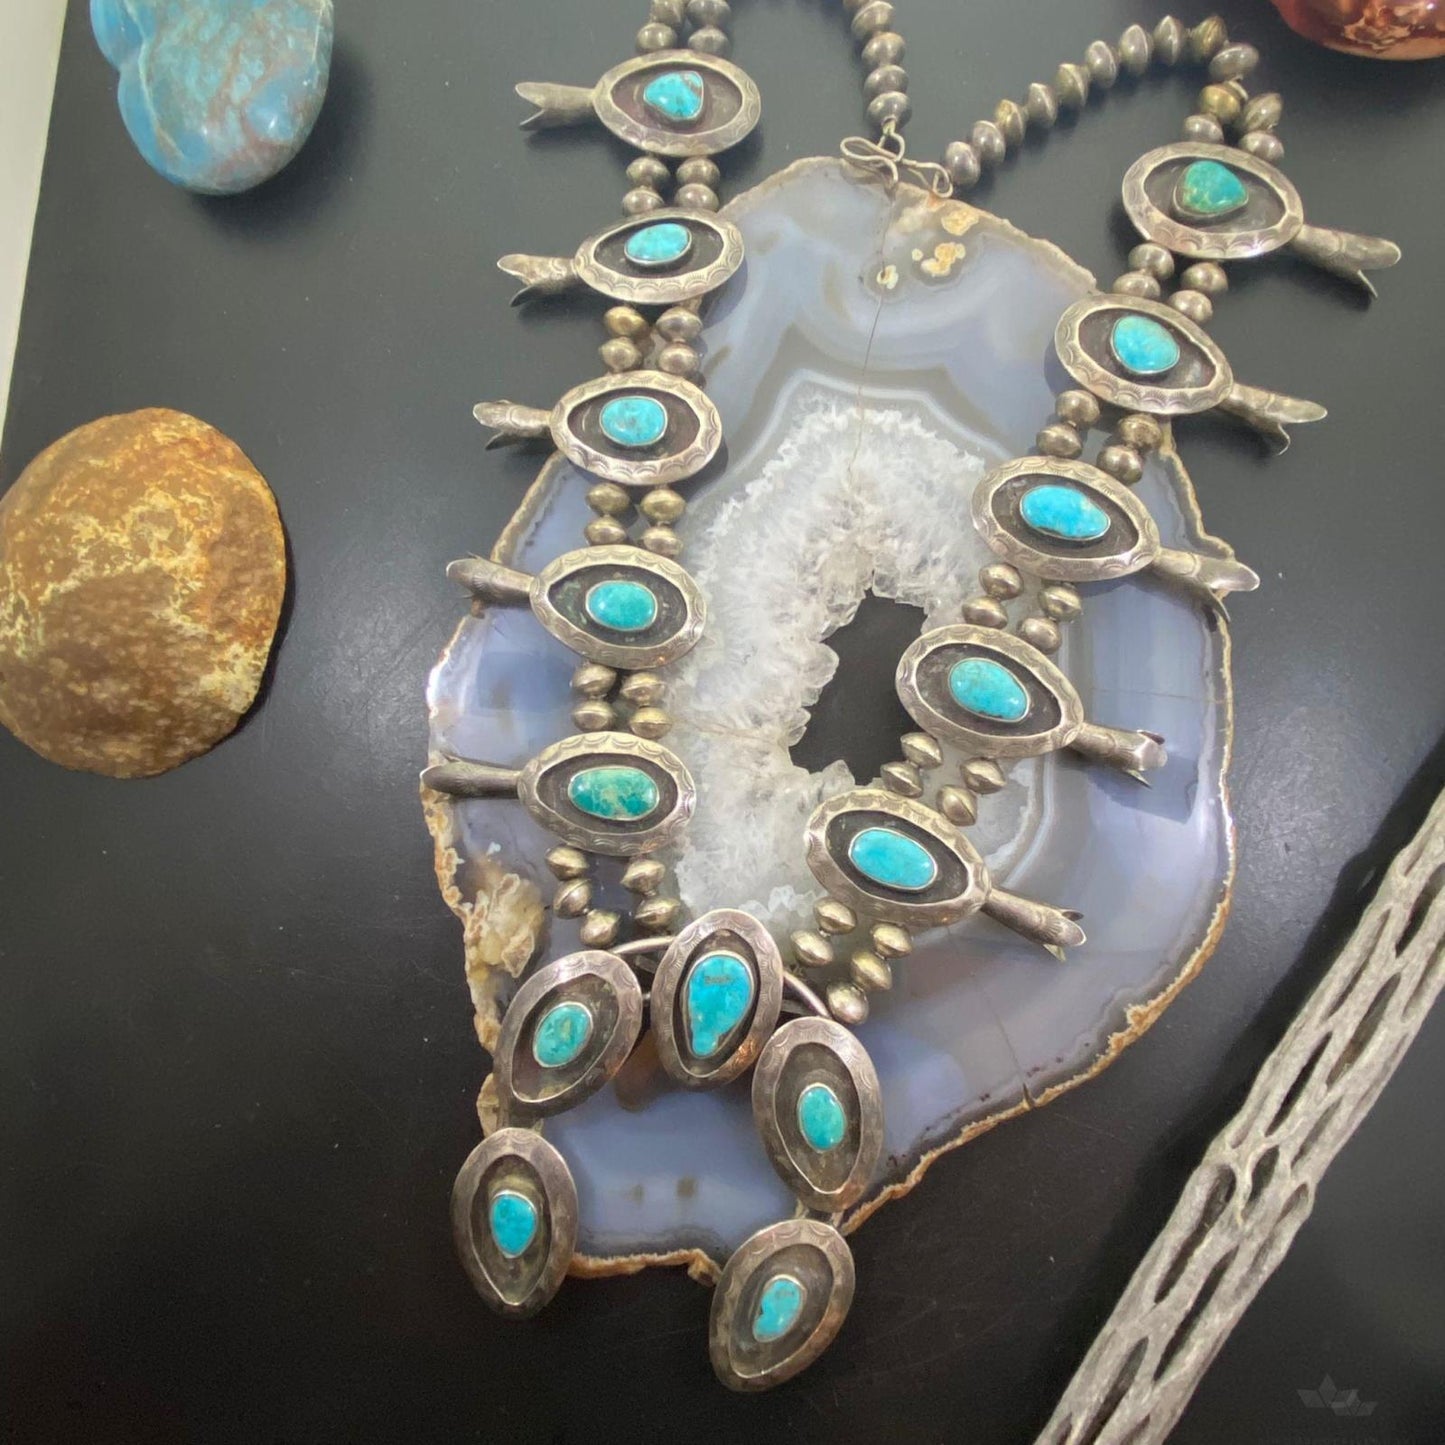 Antique Native American Silver Turquoise Shadow Box Squash Blossom Necklace 28"